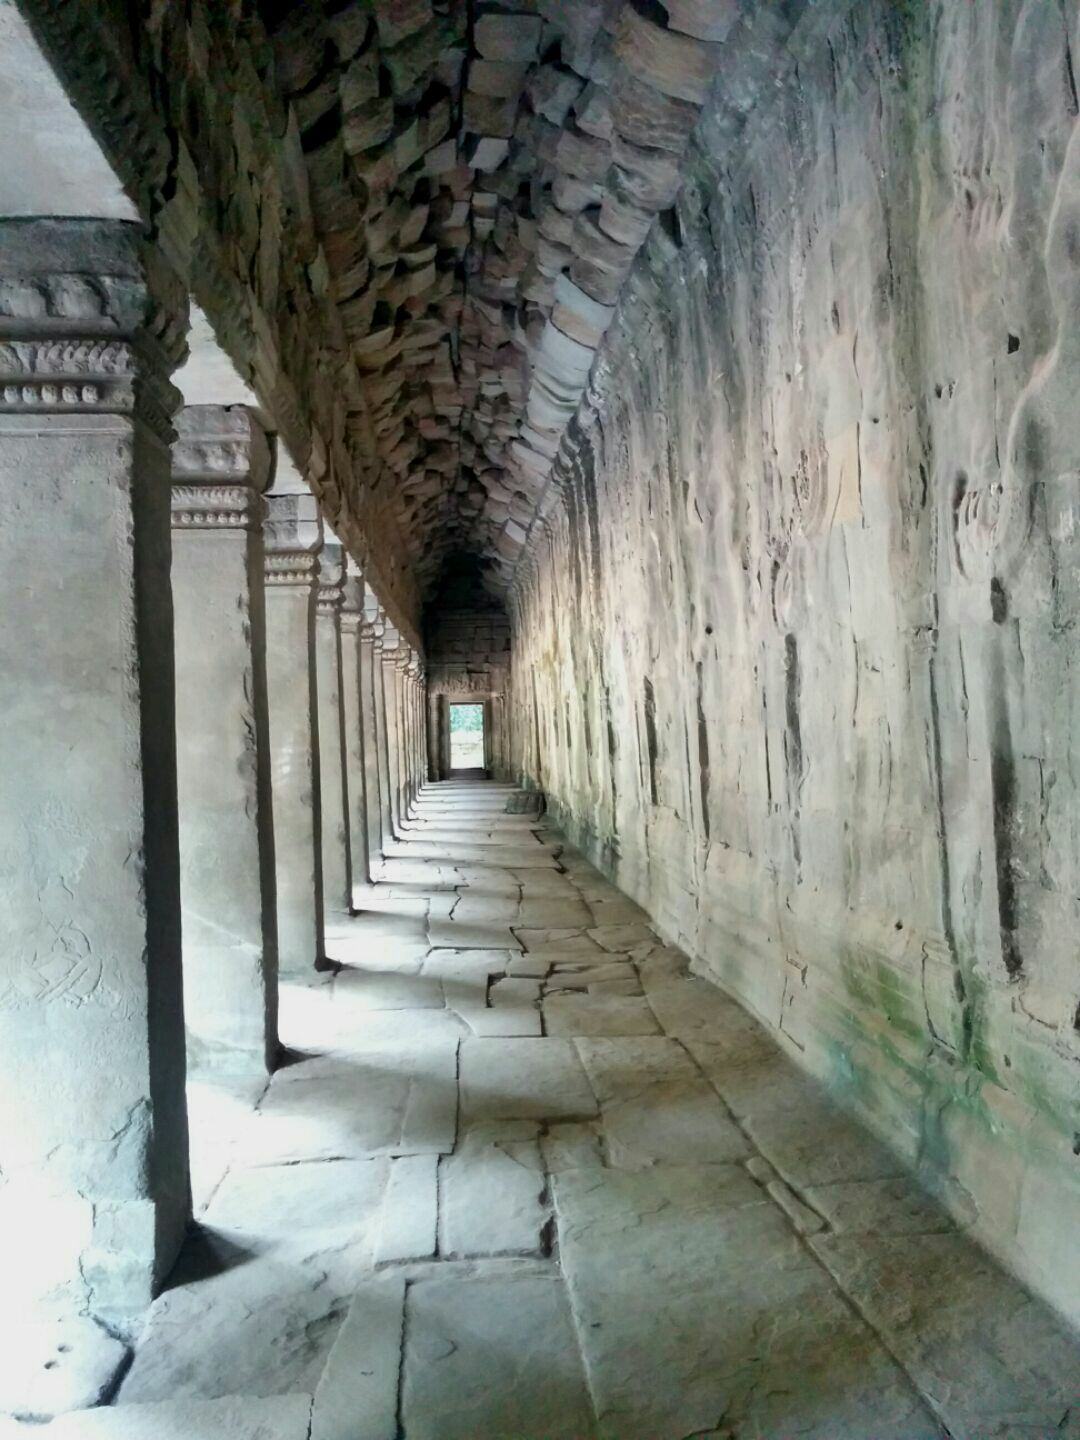 Temple temple architecture the way forward architecture built structure corridor wall narrow indoors column long old diminishing perspective empty ceiling arch flooring camboja